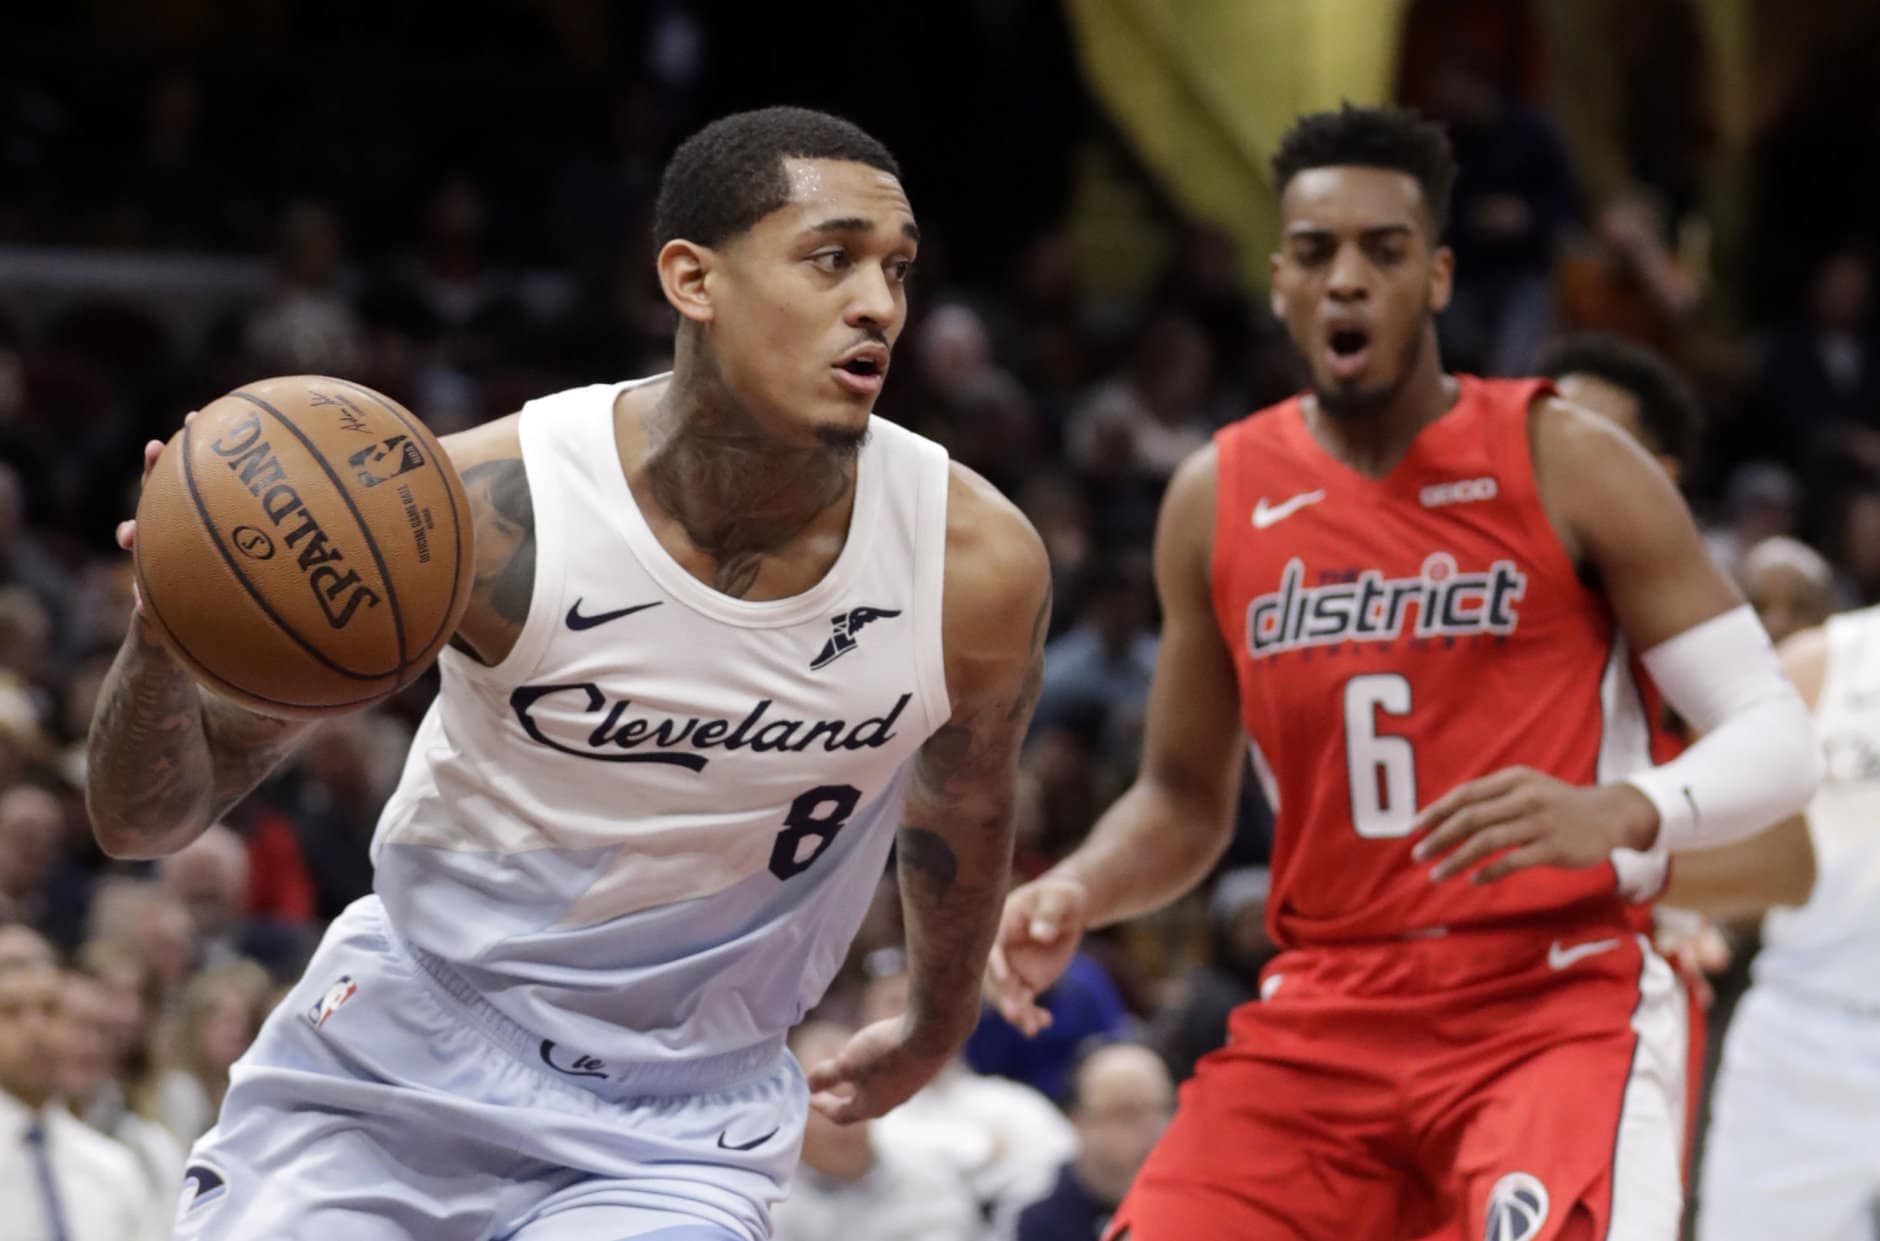 Cleveland Cavaliers' Jordan Clarkson (8) drives against the Washington Wizards in the first half of an NBA basketball game, Tuesday, Jan. 29, 2019, in Cleveland. (AP Photo/Tony Dejak)